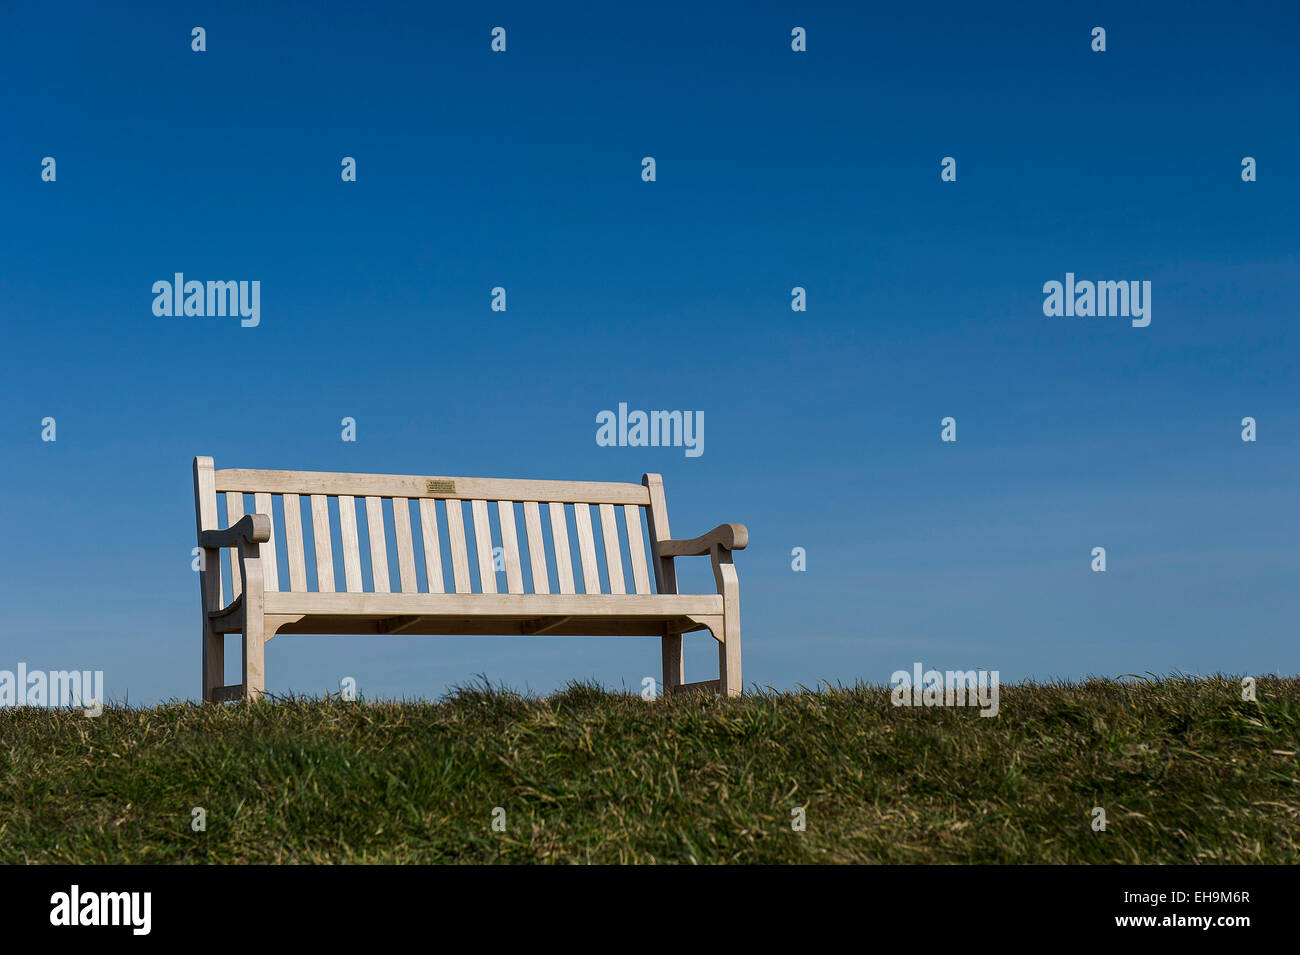 An empty wooden bench. Stock Photo